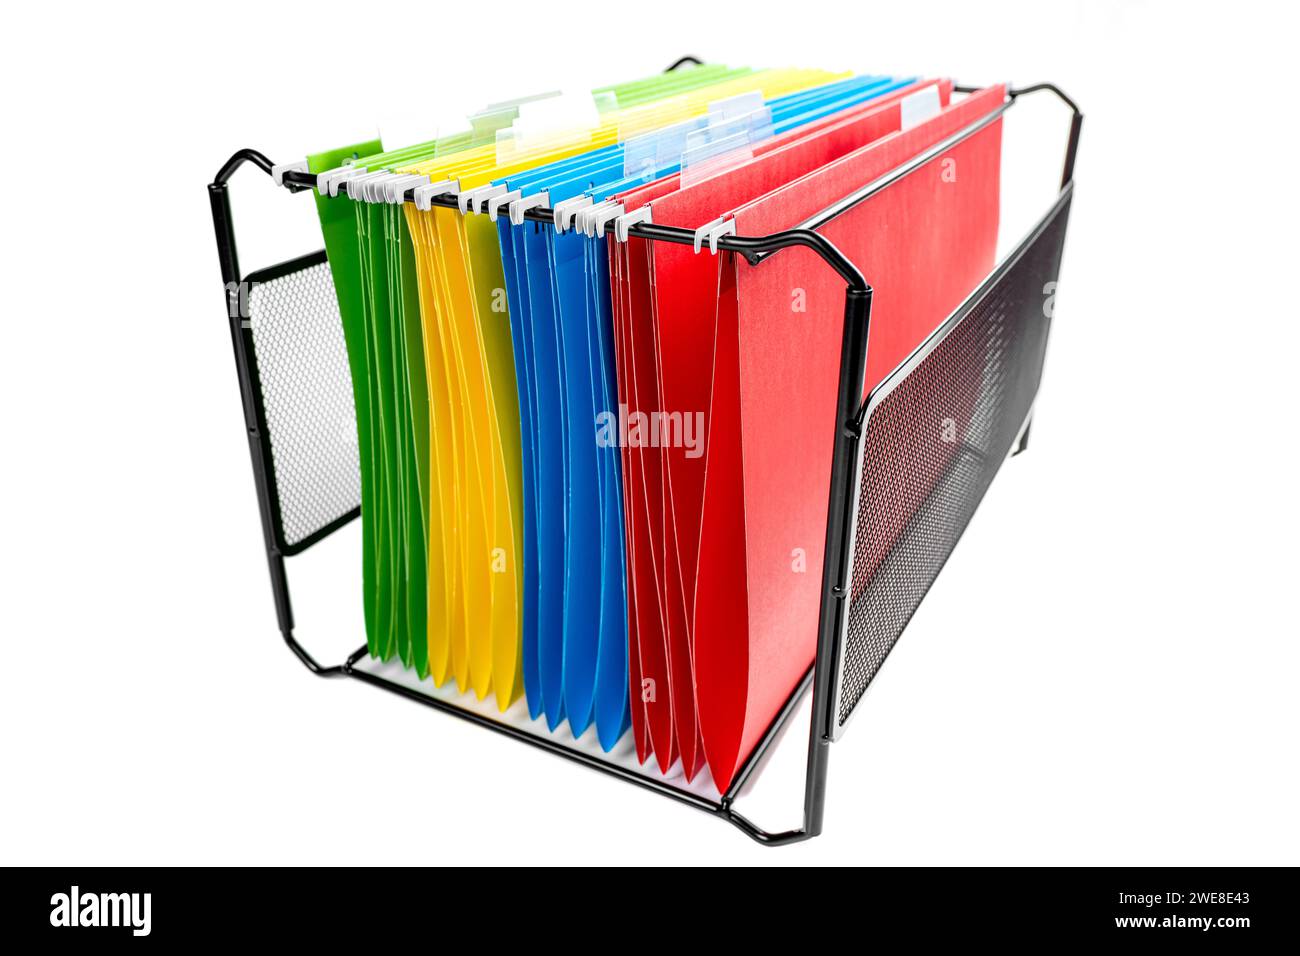 Closeup view of the colorful hanging file folder on the file organizer isolated over a white background Stock Photo